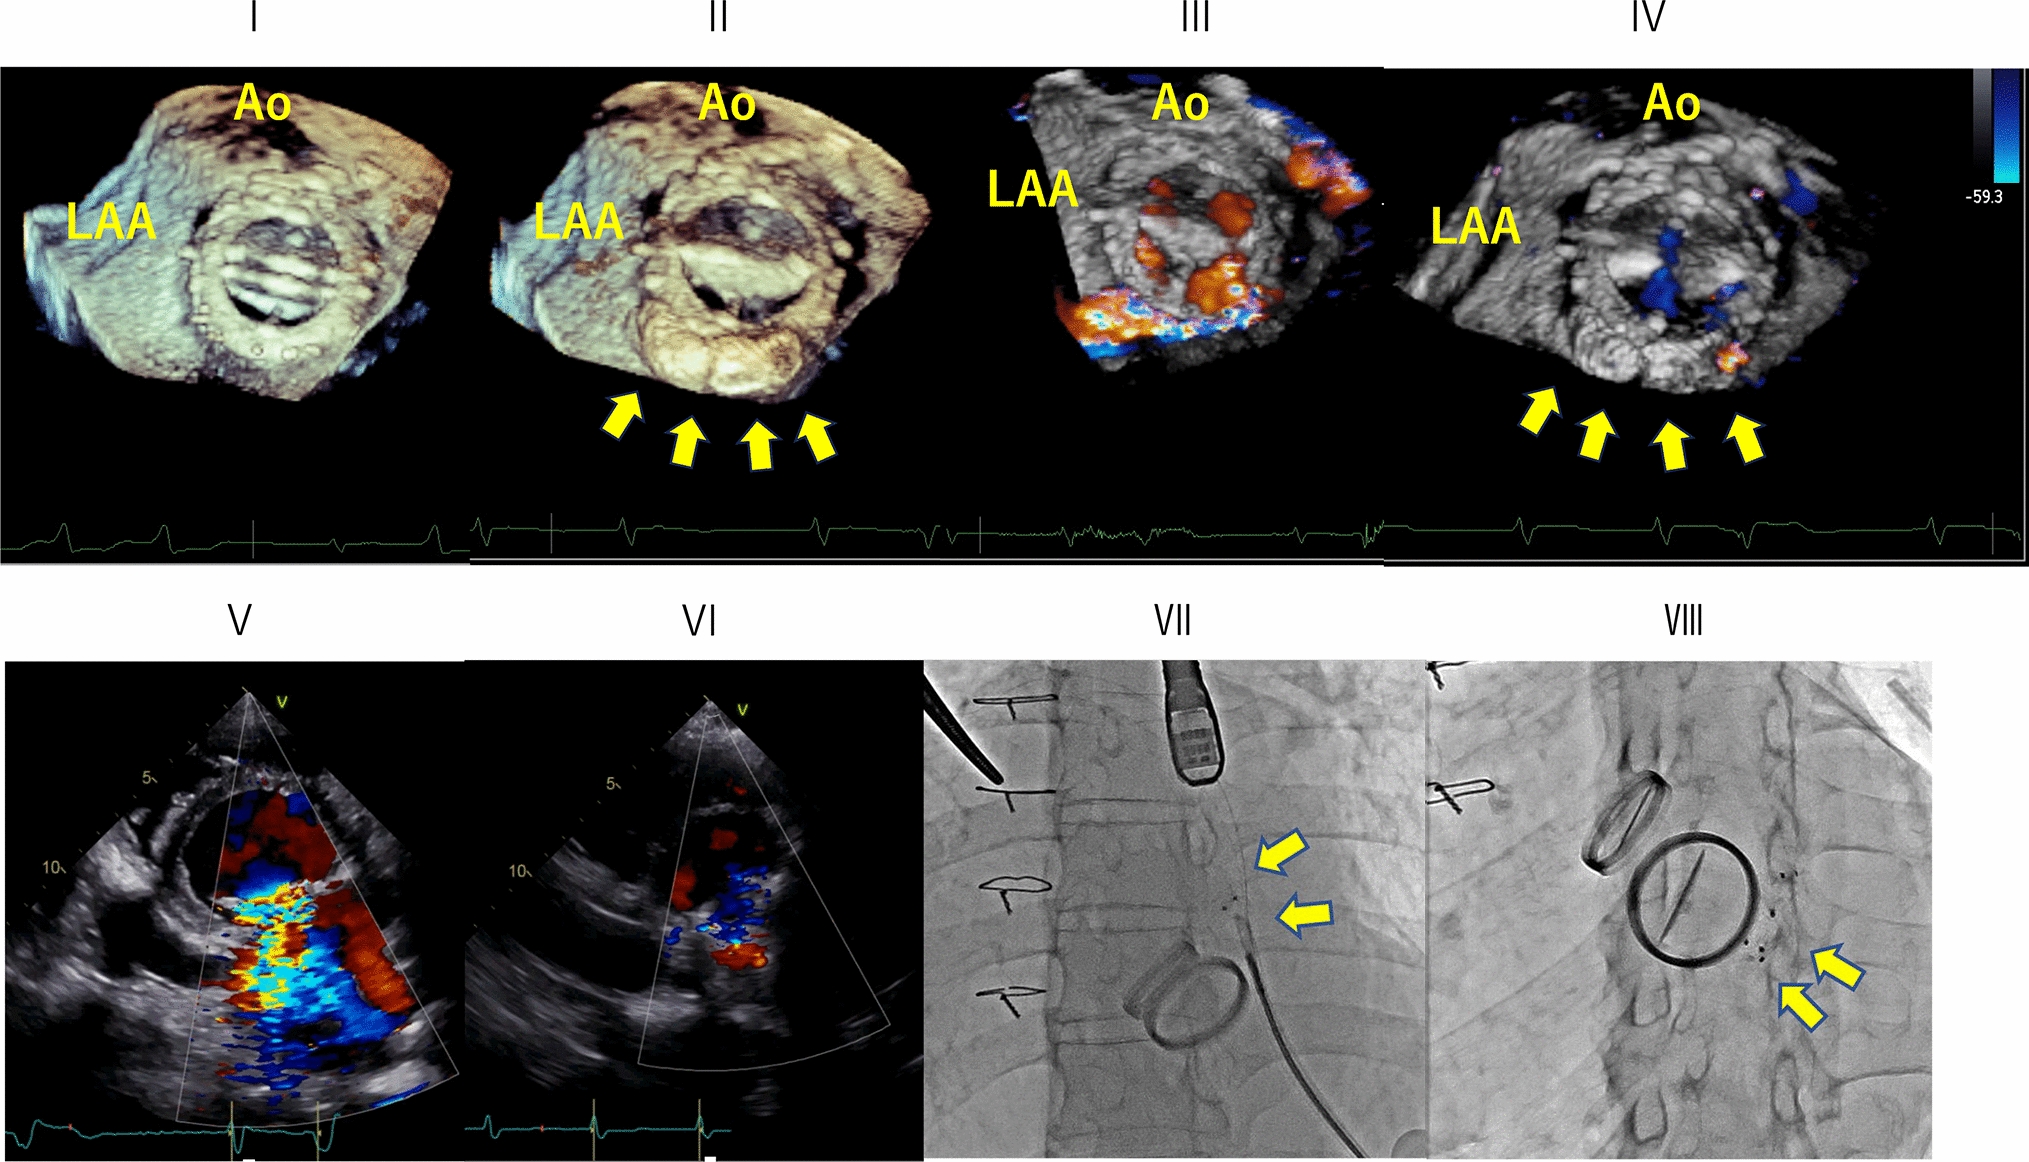 Transcatheter closure of mitral paravalvular leak by transapical approach with rectangular paravalvular leak device